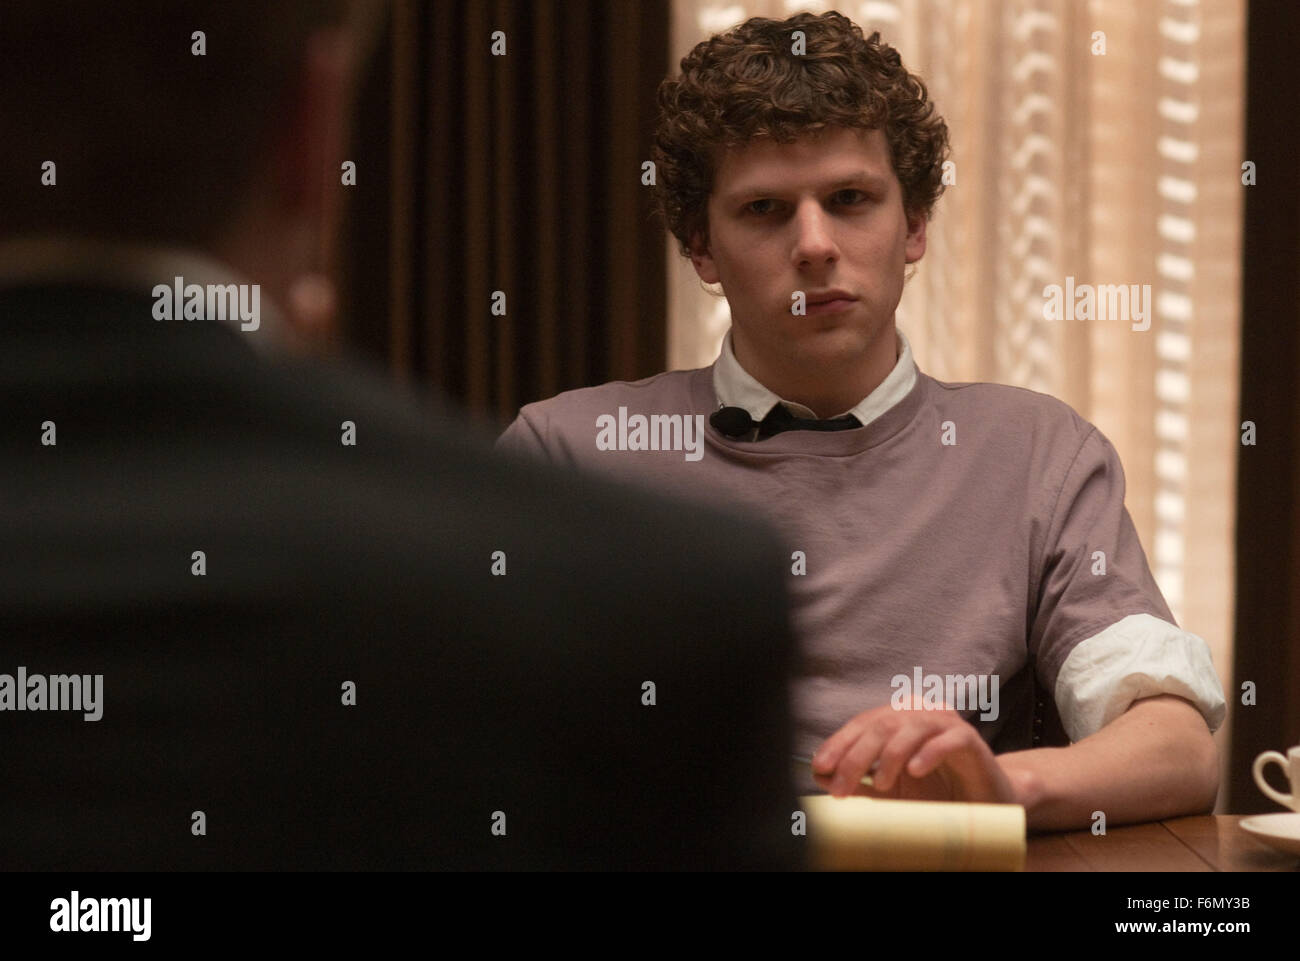 RELEASE DATE: October 1, 2010. MOVIE TITLE: The Social Network. STUDIO: Columbia Pictures. PLOT: On a fall night in 2003, Harvard undergrad and computer programming genius Mark Zuckerberg sits down at his computer and heatedly begins working on a new idea. In a fury of blogging and programming, what begins in his dorm room soon becomes a global social network and a revolution in communication. A mere six years and 500 million friends later, Mark Zuckerberg is the youngest billionaire in history... but for this entrepreneur, success leads to both personal and legal complications. PICTURED: JESS Stock Photo